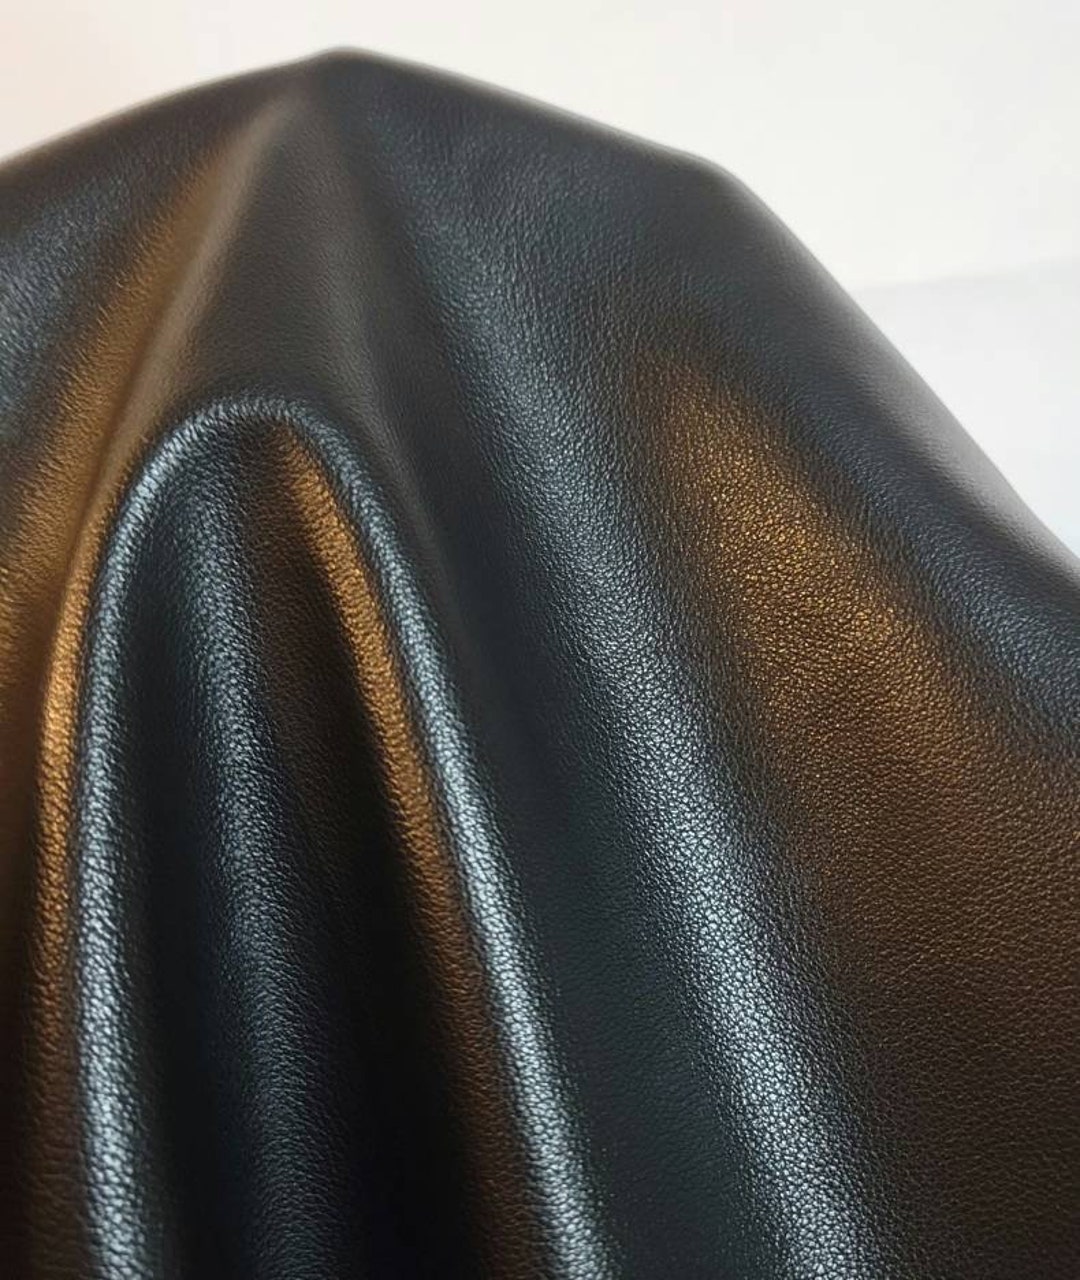 Soft PU Leather Large Faux Leather 36 x 54, 0.8 mm Thickness Faux Leather  Fabric by The Yard Leather Material for Upholstery Couch Sofa Bags Chairs